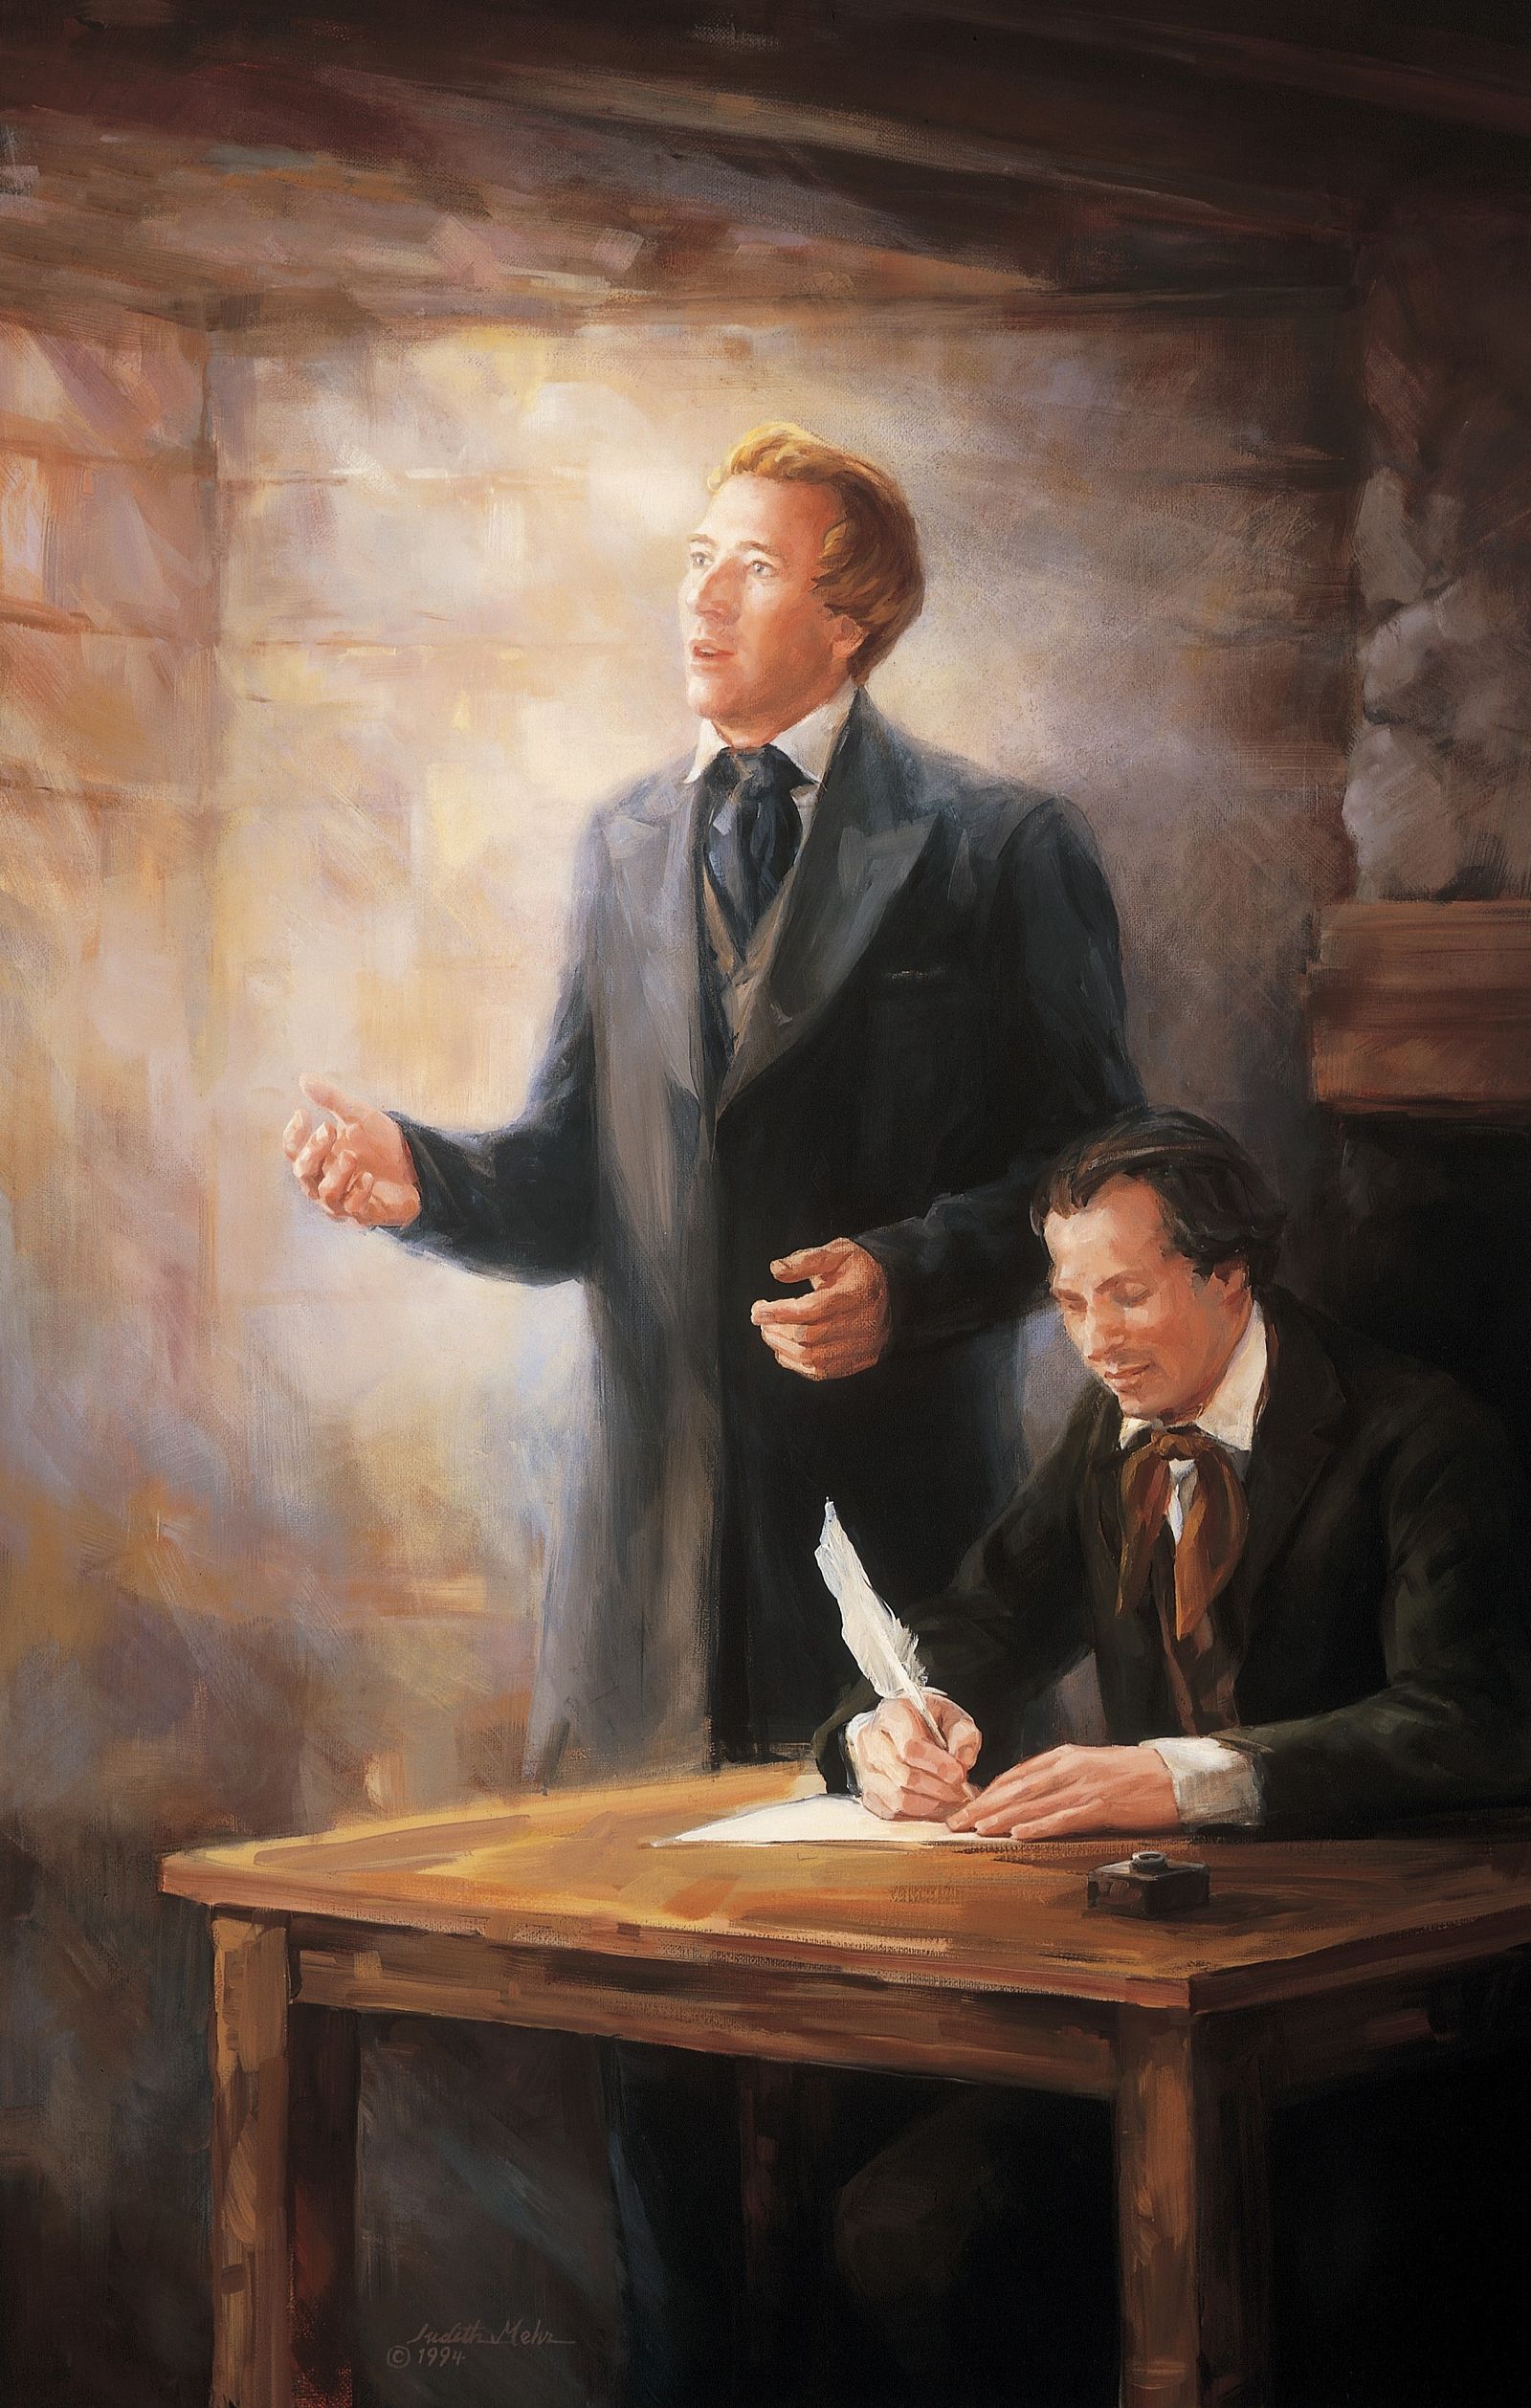 Revelation Given to Joseph Smith at the Organization of the Church, by Judith A. Mehr